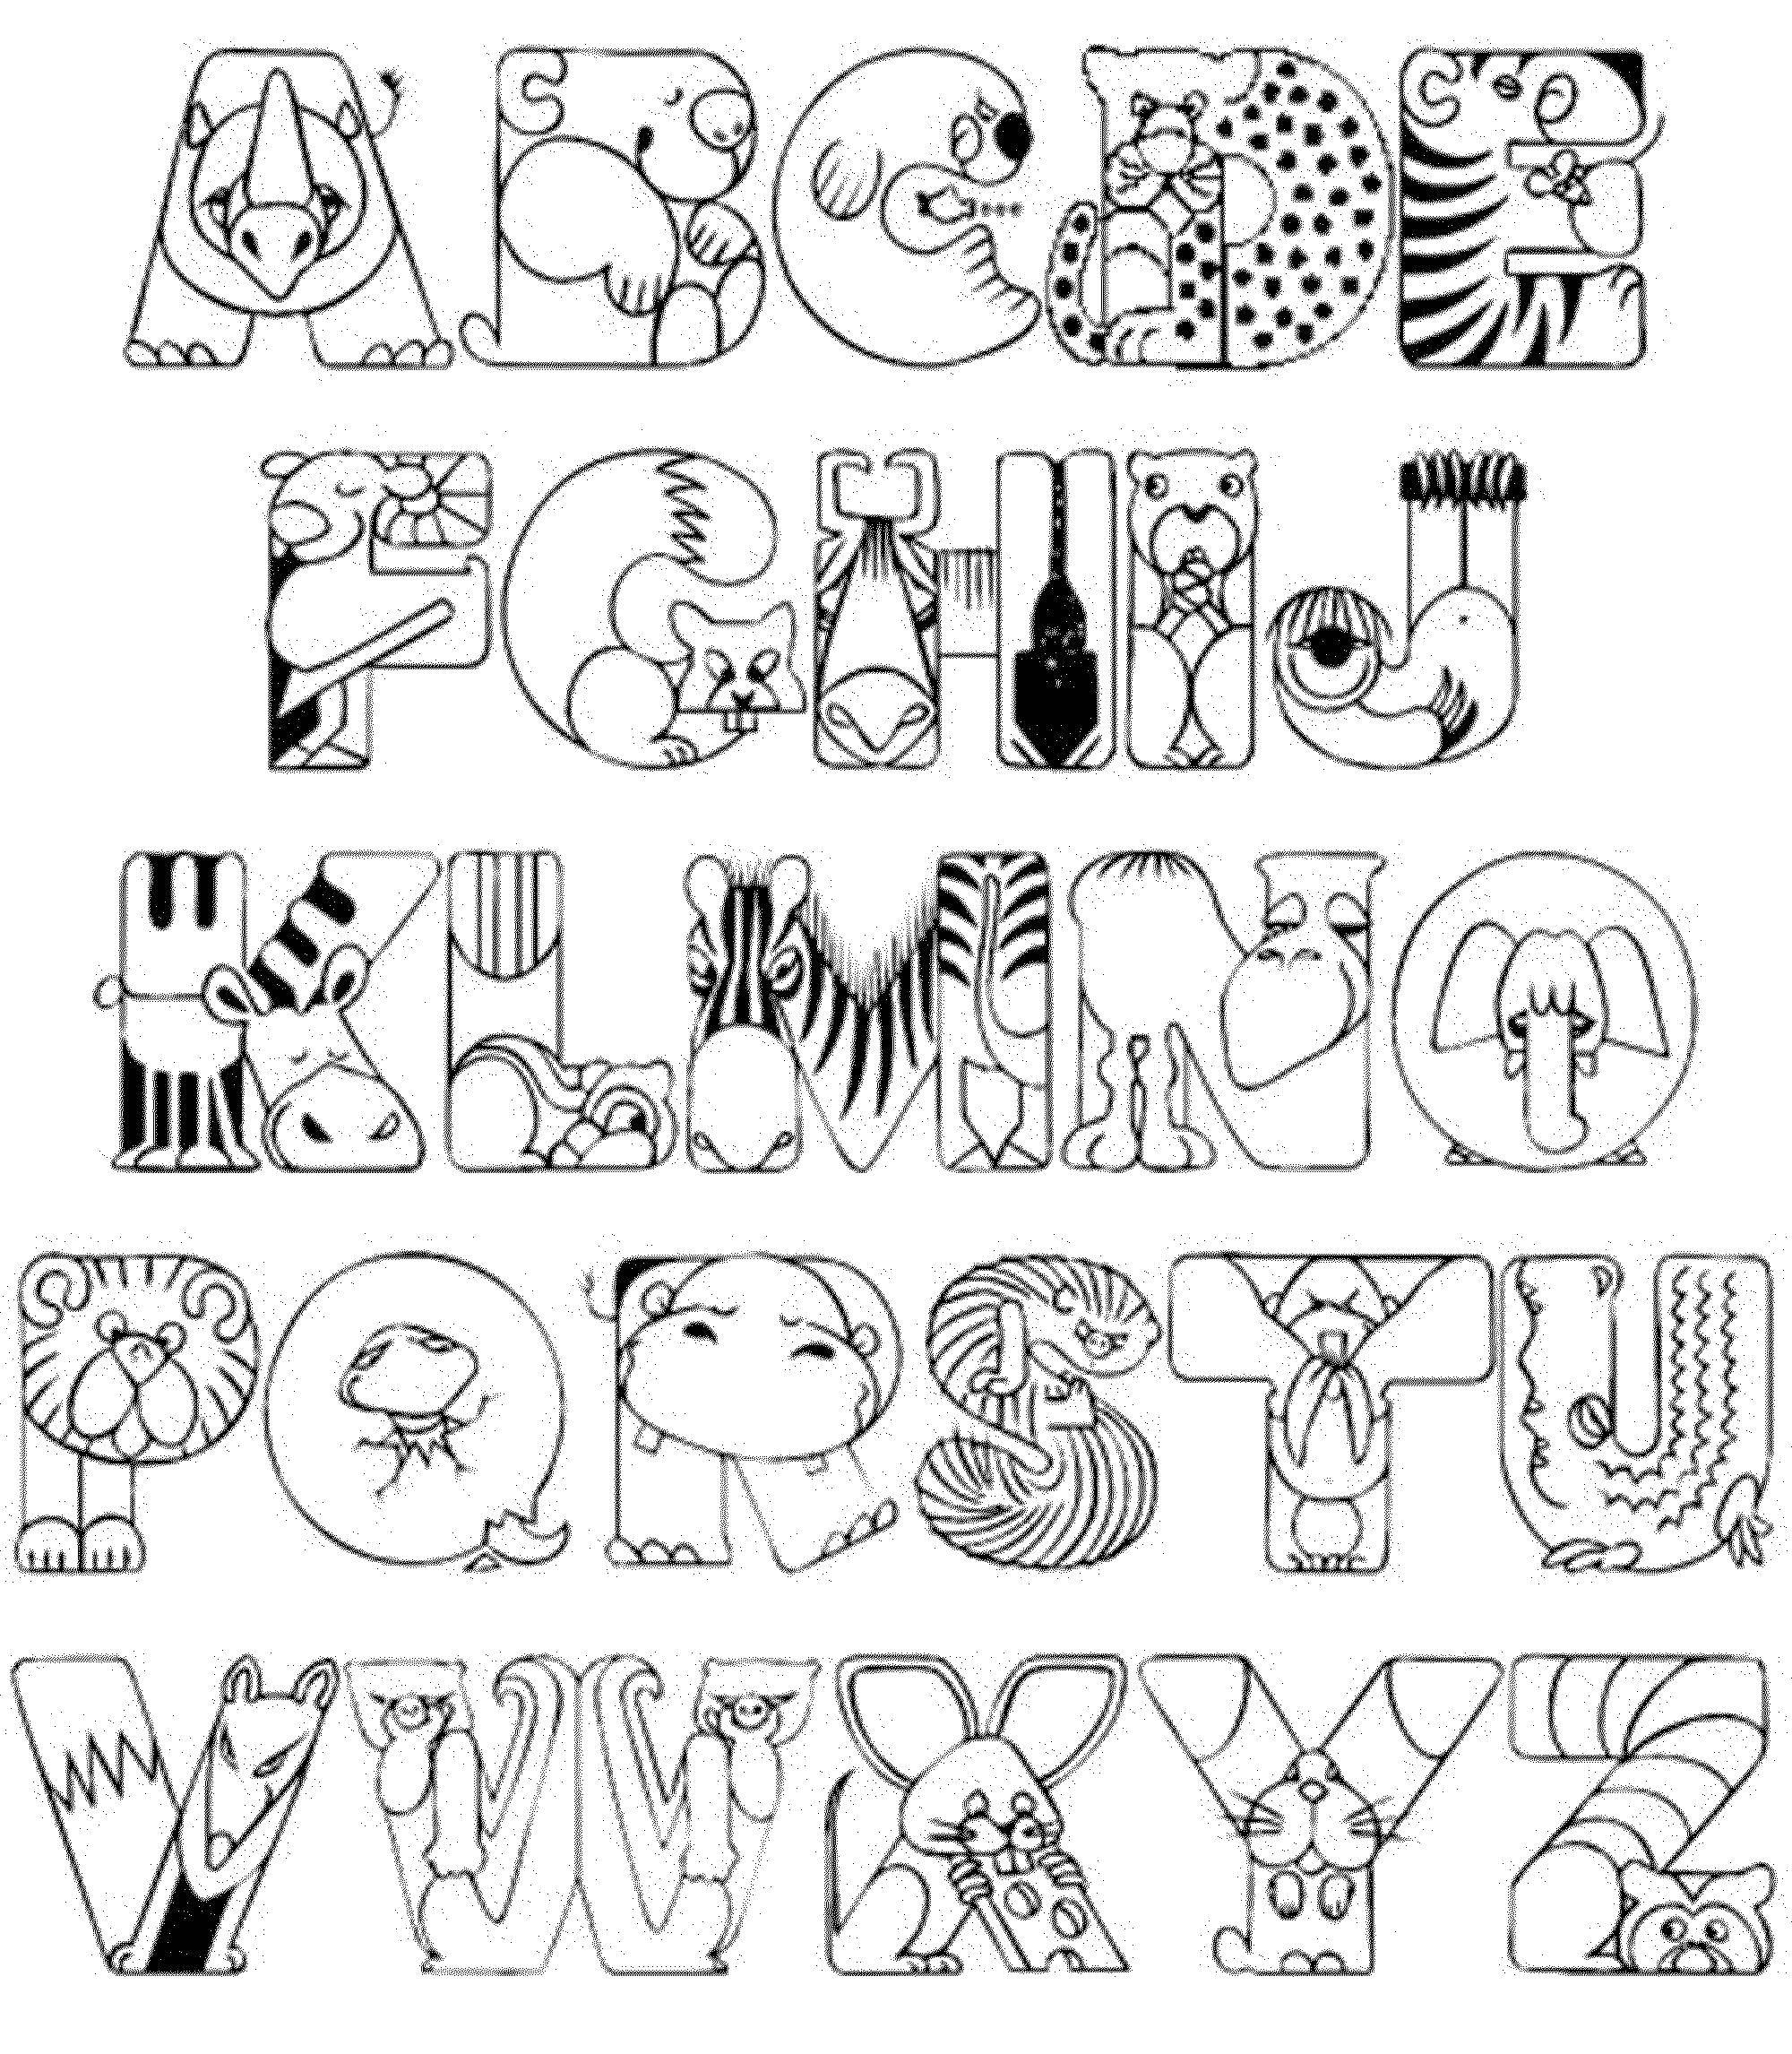 Coloring Alphabet. Category the alphabet. Tags:  the alphabet, letters.